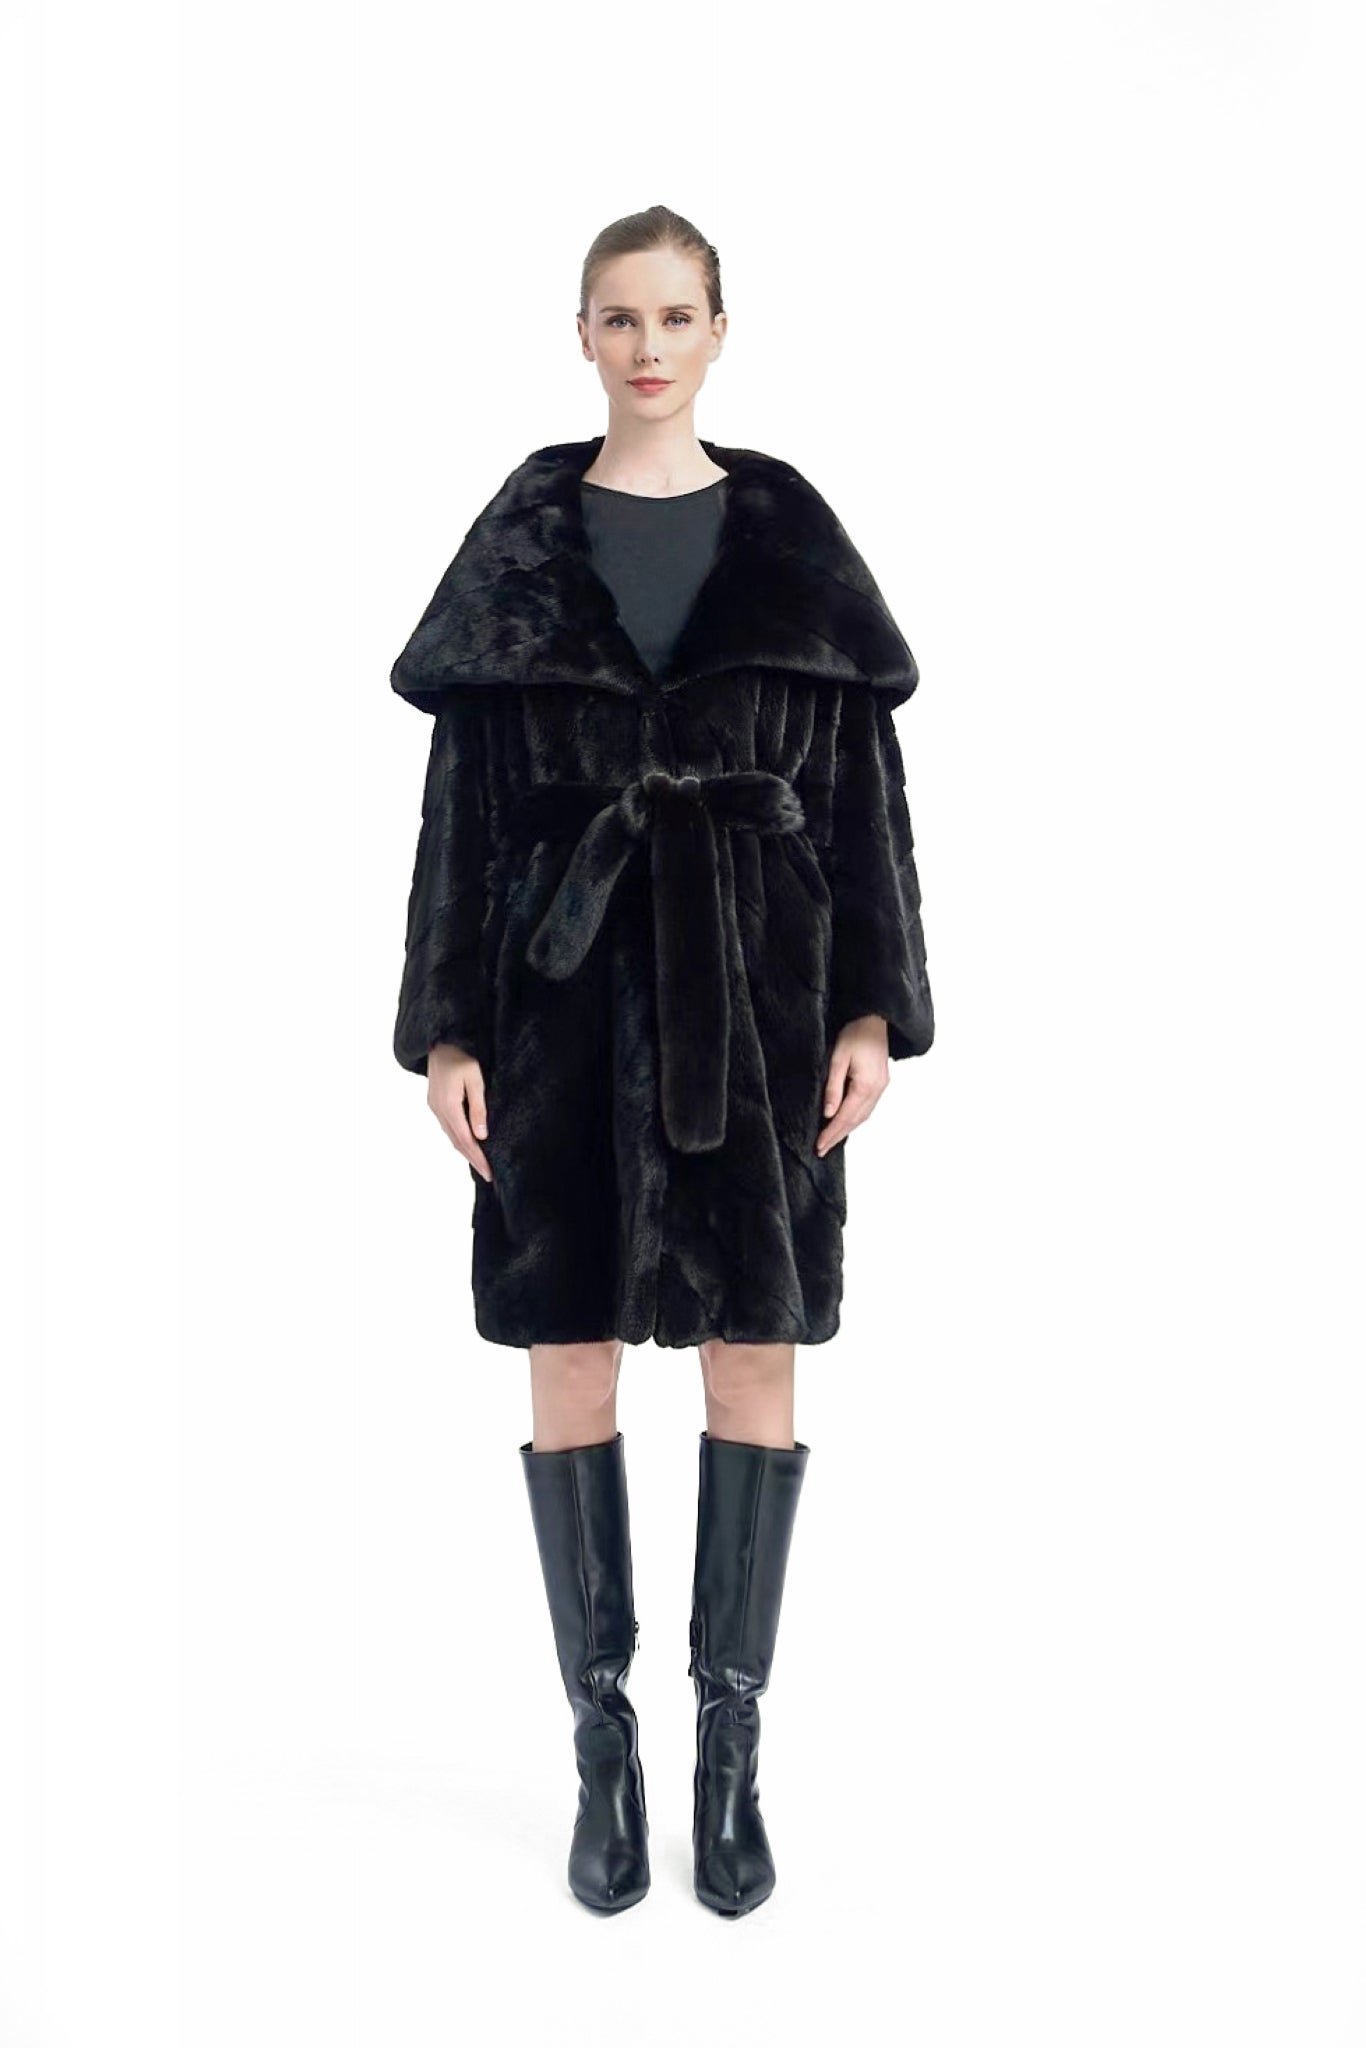 Elegant Long Mink Fur Coat with Hood - Make a Fashion Statement this Winter